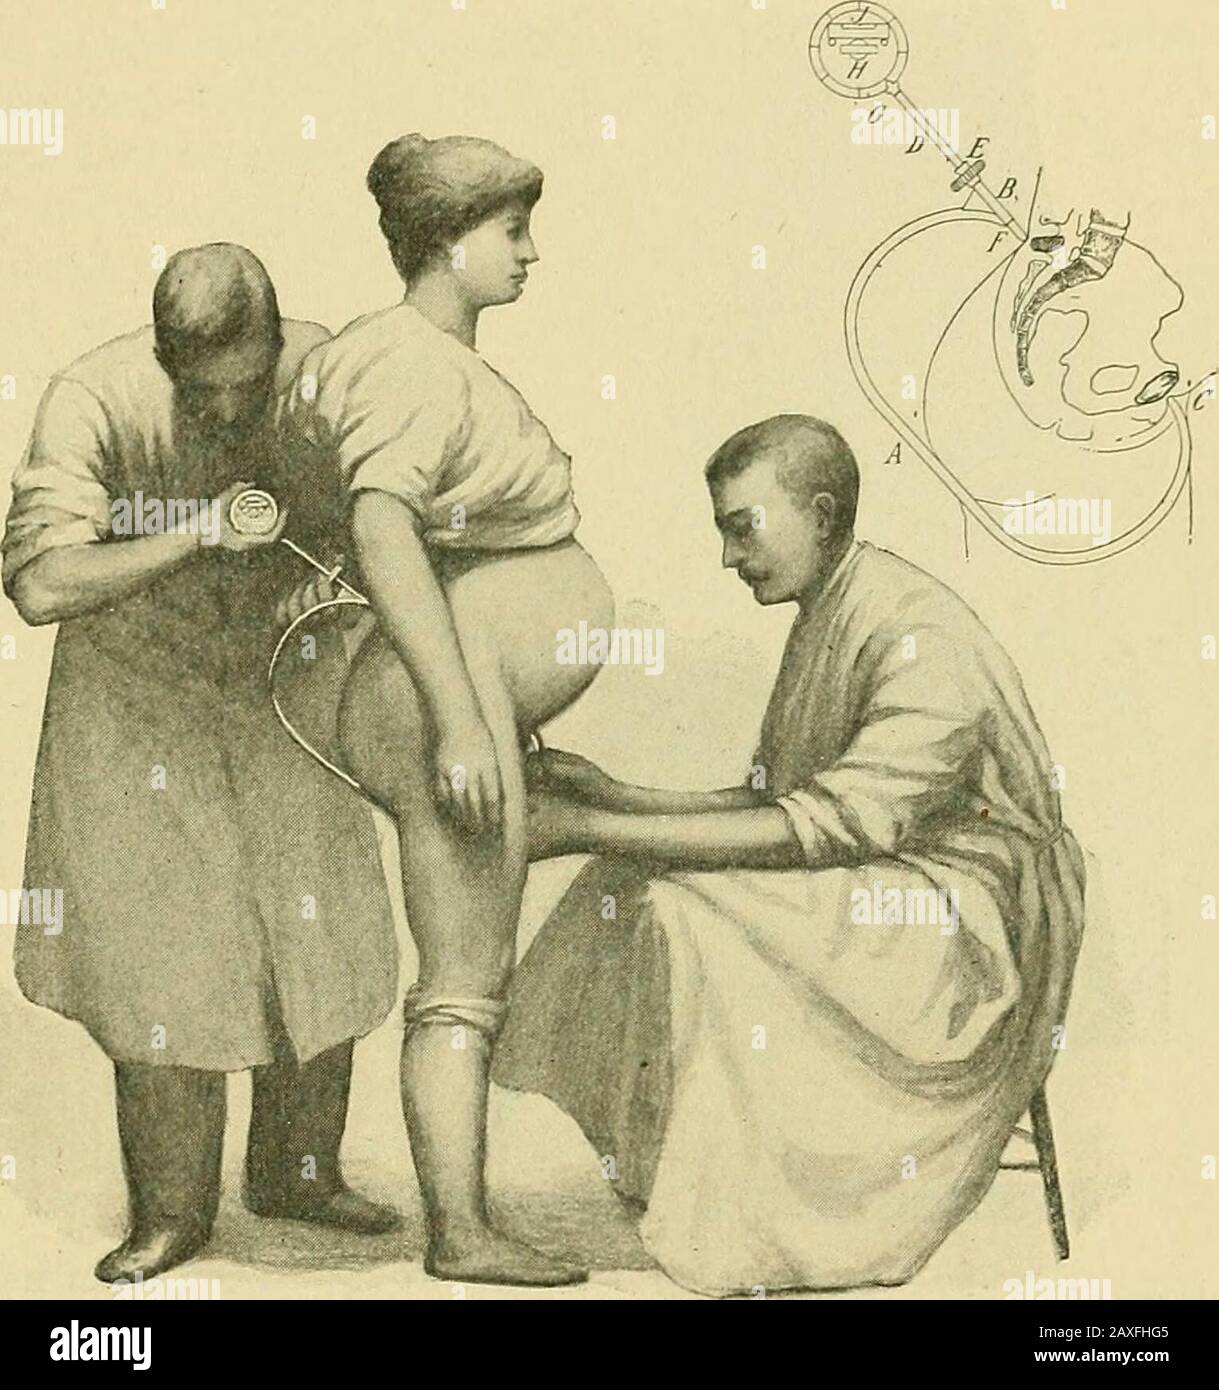 The practice of obstetrics, designed for the use of students and practitioners of medicine . gles. Some authorities* The Rontgen Rays in Medicine and Surgery, 1901, p. 378. THE EXAMINATION OF PREGNANCY. 179 have seen in cliseometry a valuable prospective resource in the differential diag-nosis of pelvic deformities, while others believe that the subject of forceps-tractionshould benefit most from increased study of the inclination. Cliseometers havebeen devised by Naegele, Rit-gen, Prochownik, and others, but no one apparatushas ever attained any considerable degree of recognition. Sources of Stock Photo